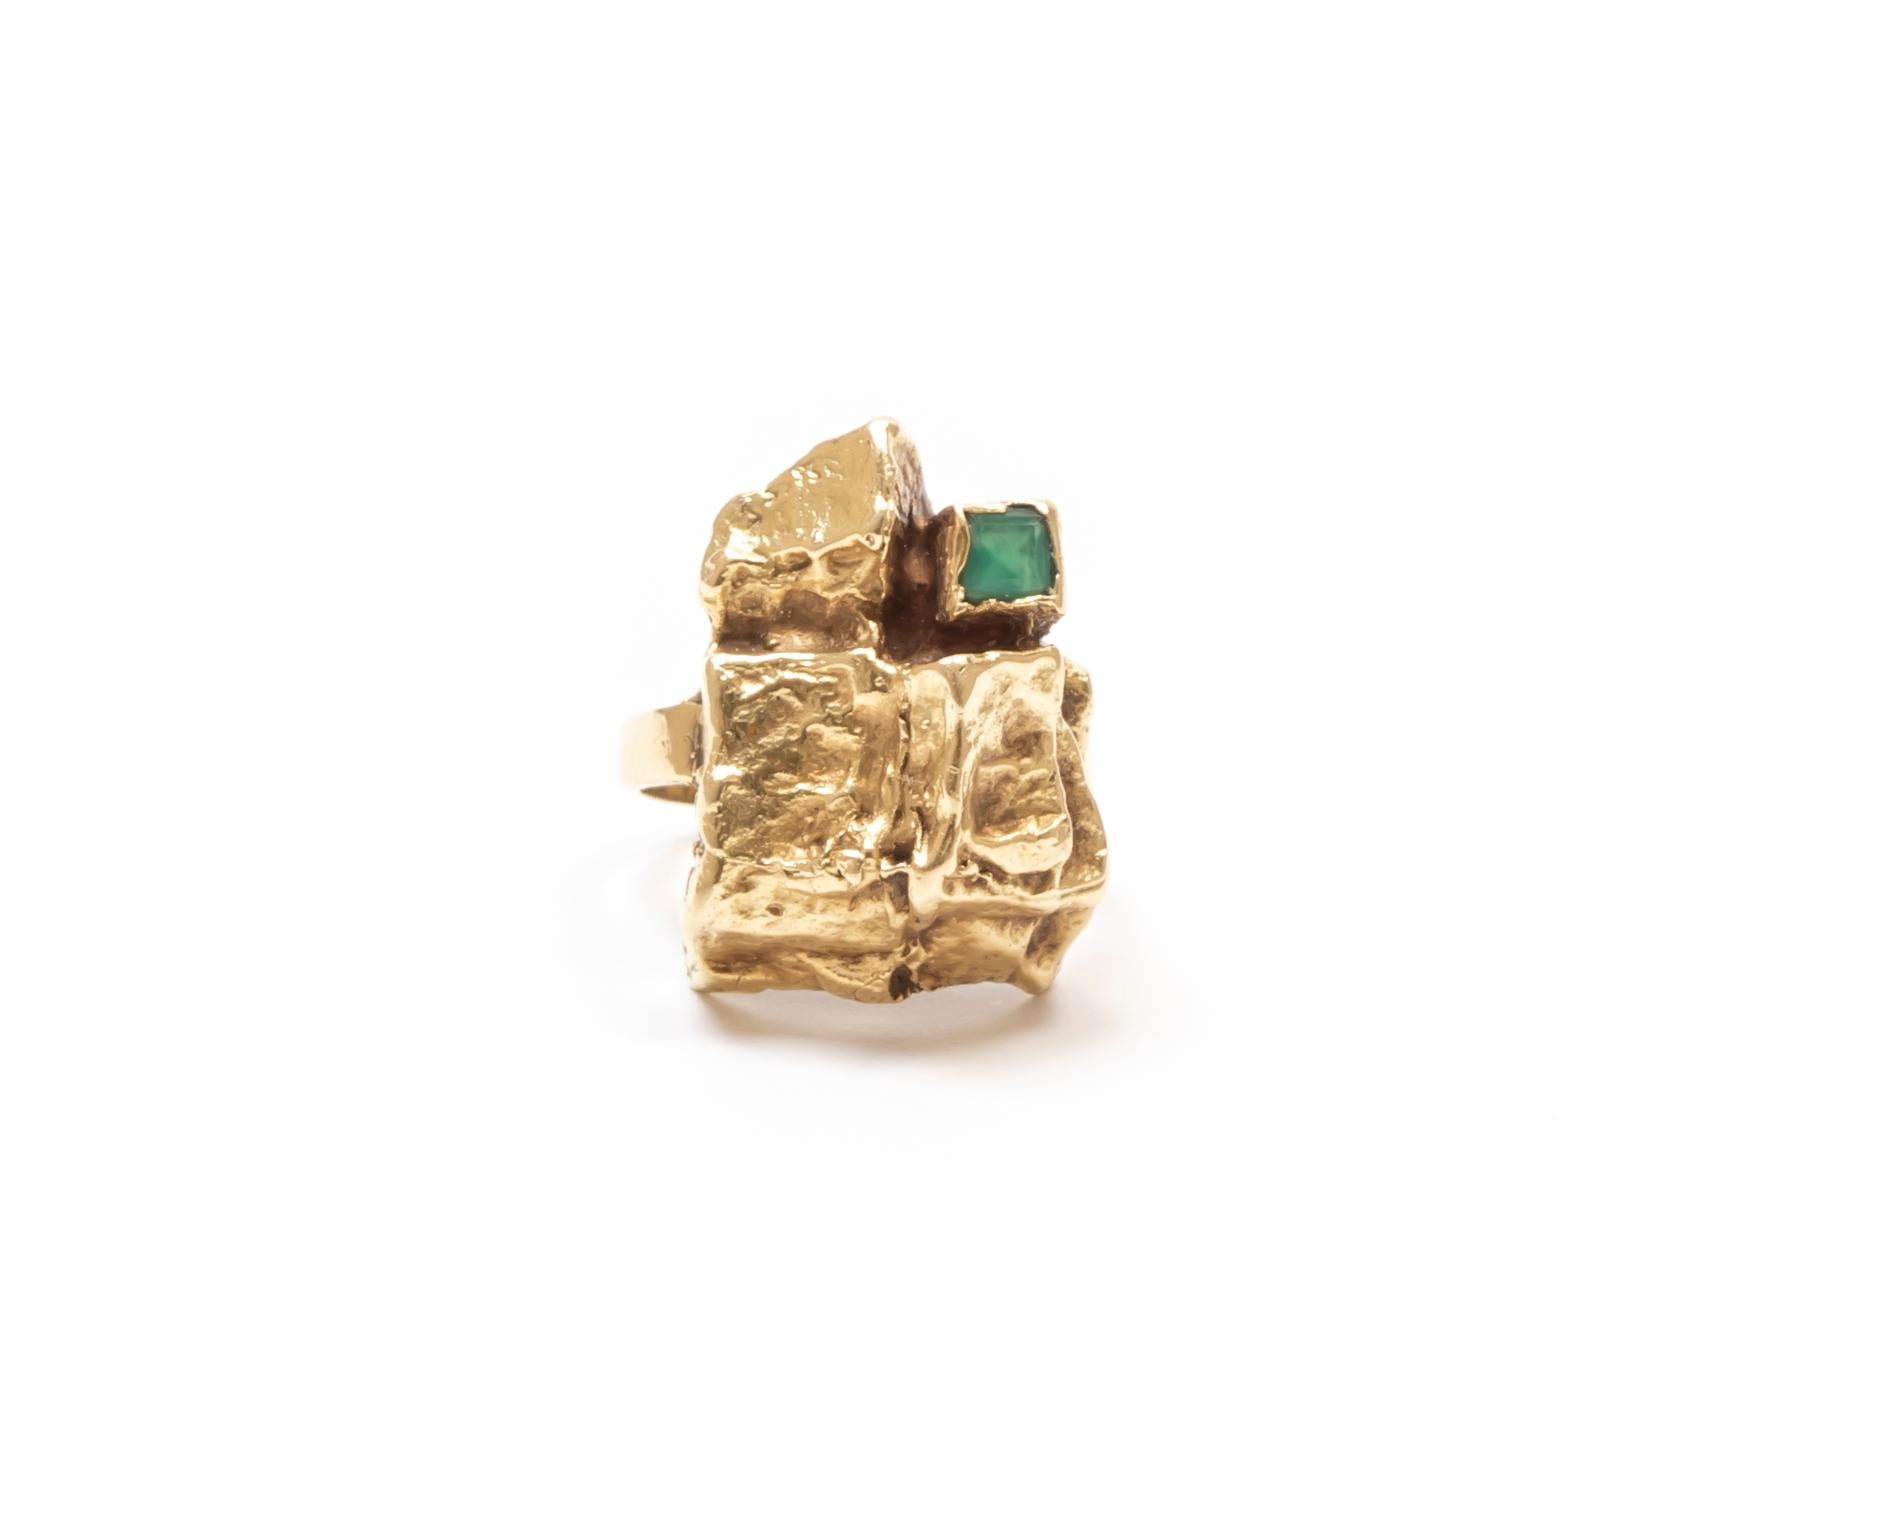 Wonderful and classic 1970s gold ring with a green coral. Designed and made in Finland from cirka 1970s second half. The ring is in excellent vintage condition.